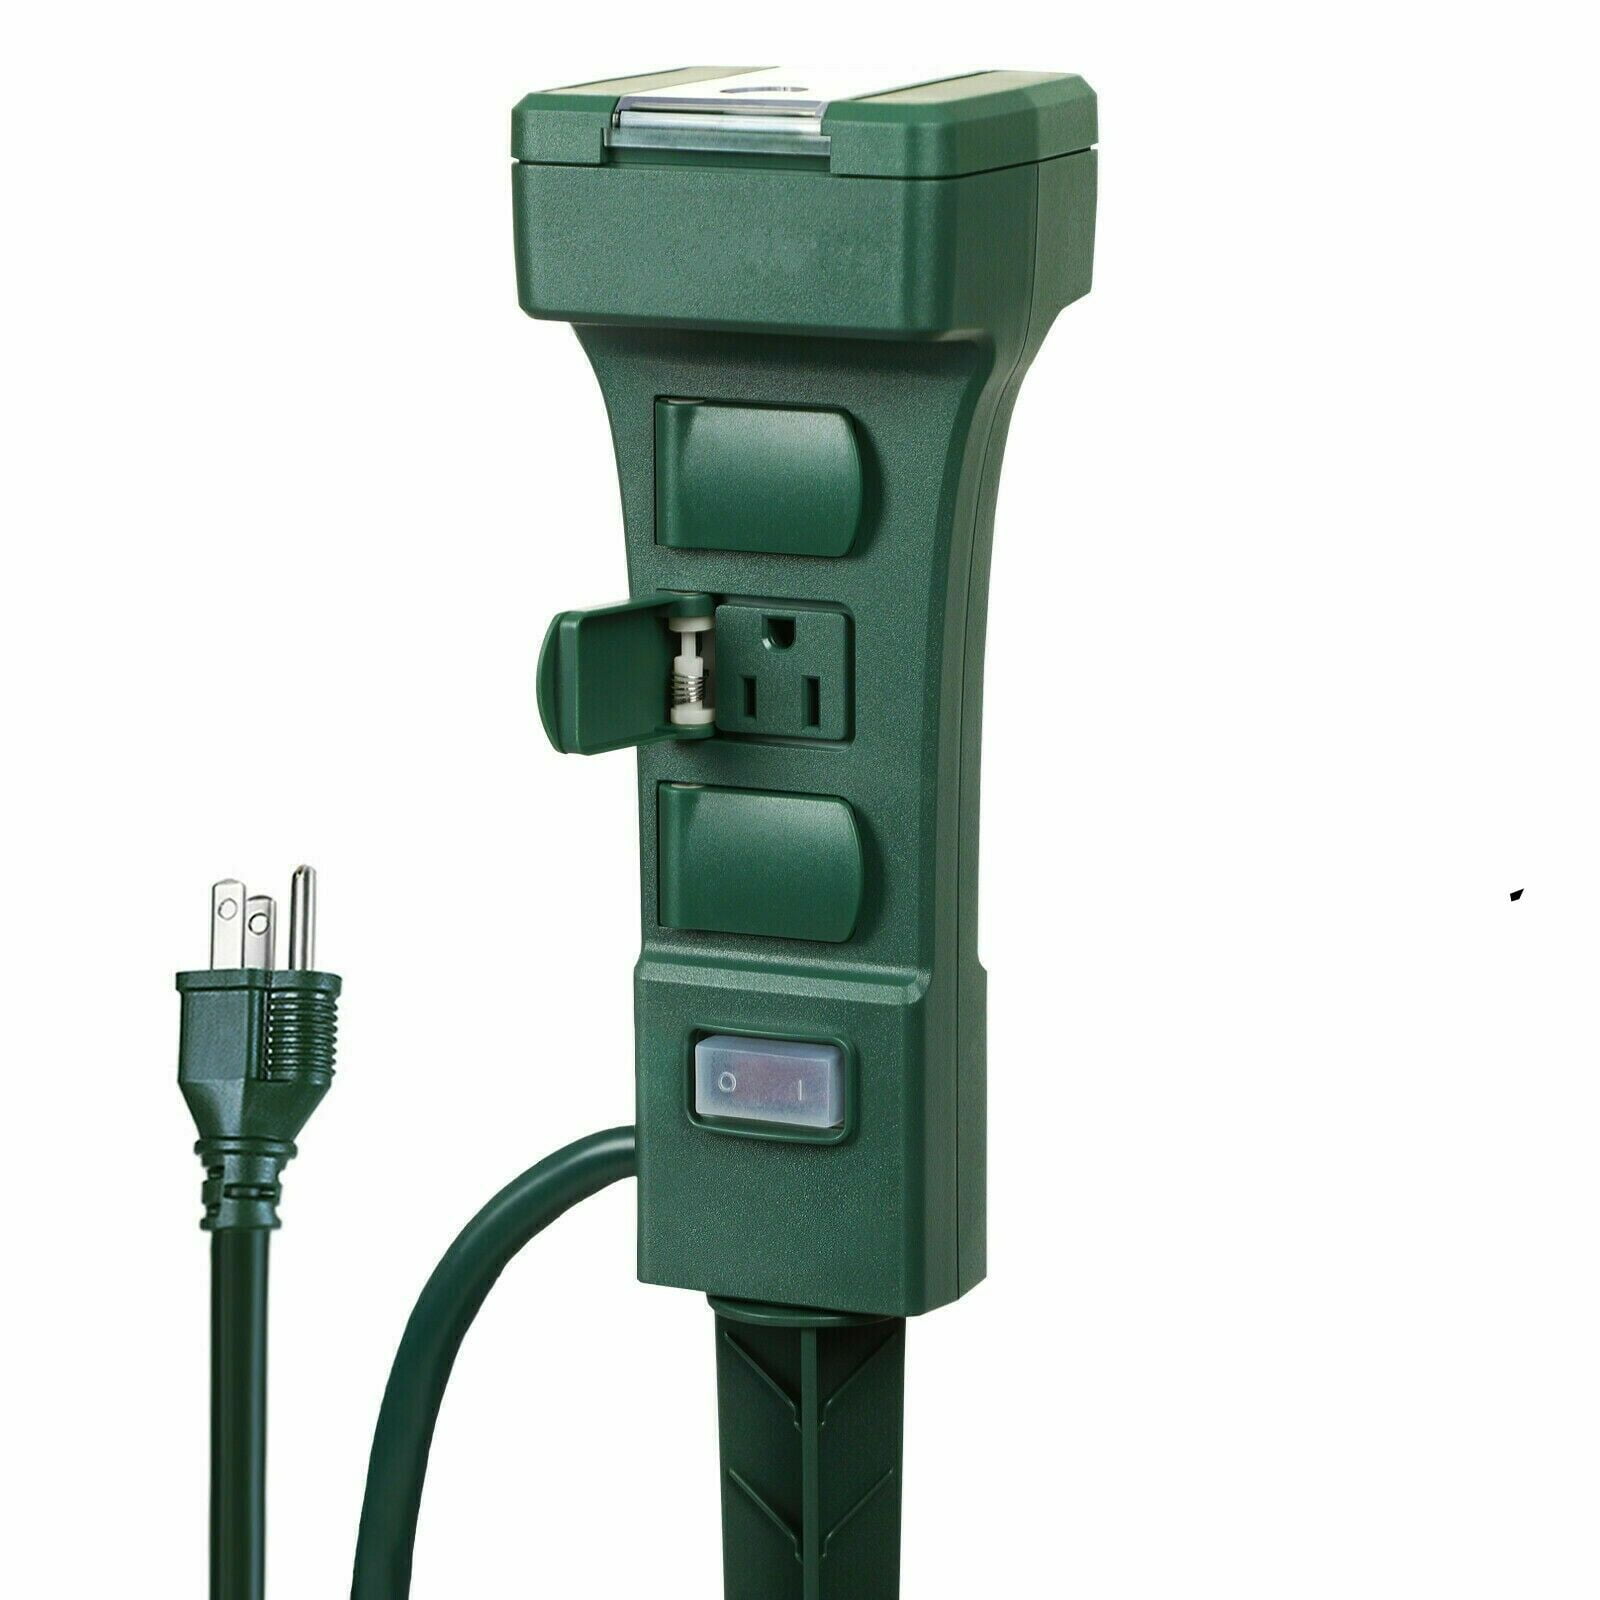 SPC1236AT/27 Weather Resistant Plug-in 6-Hour Countdown Seasonal/Landscape Lighting Philips Rotatable Digital Yard Stake Timer 6 Grounded Outlets Custom ON/OFF Times Light Sensor